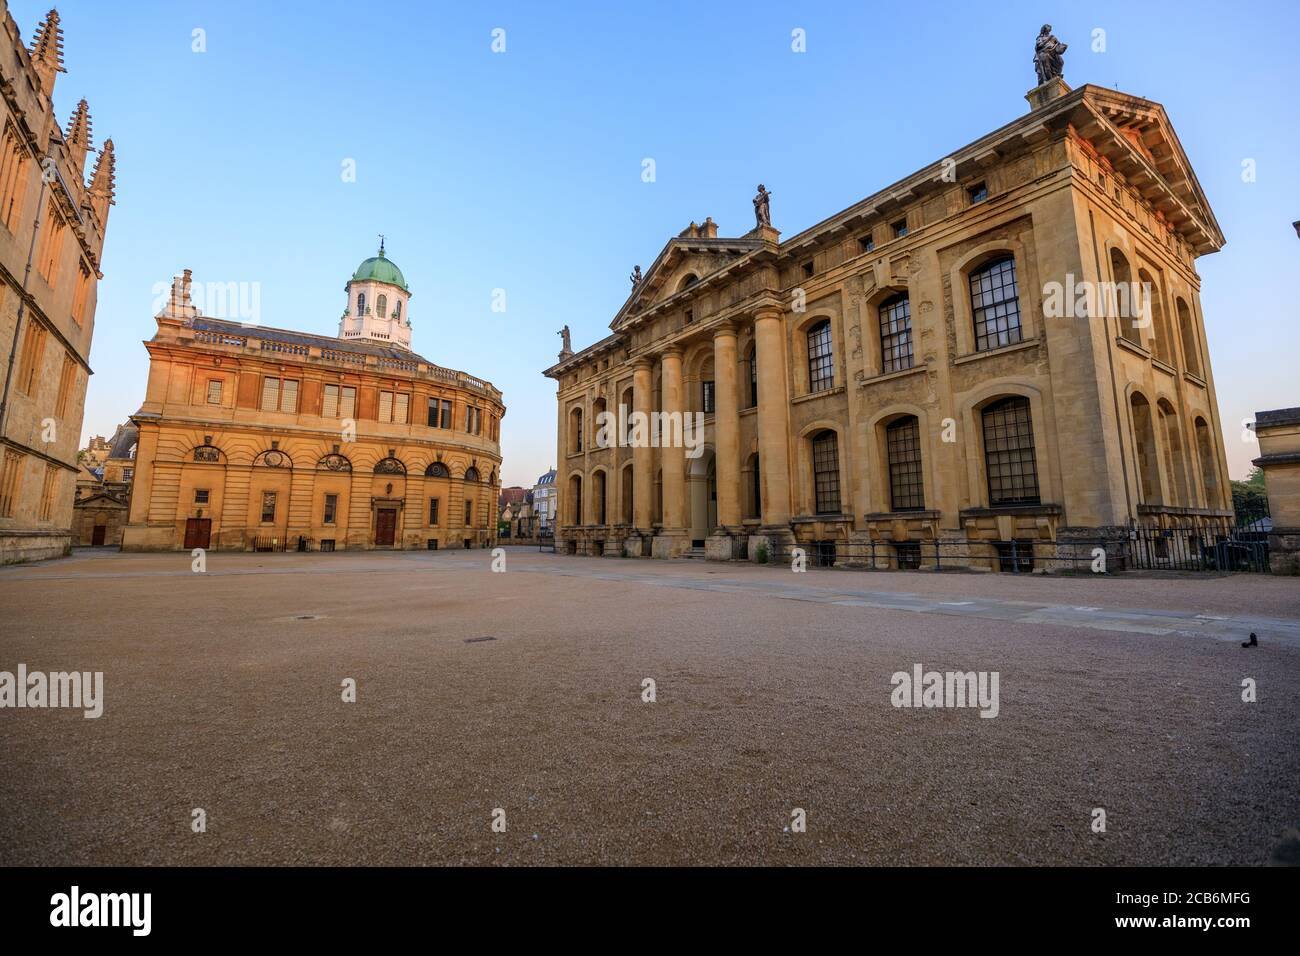 The side of the Sheldonian Theatre and the Clarendon Building with no people around, early in the morning. Oxford, England, UK. Stock Photo